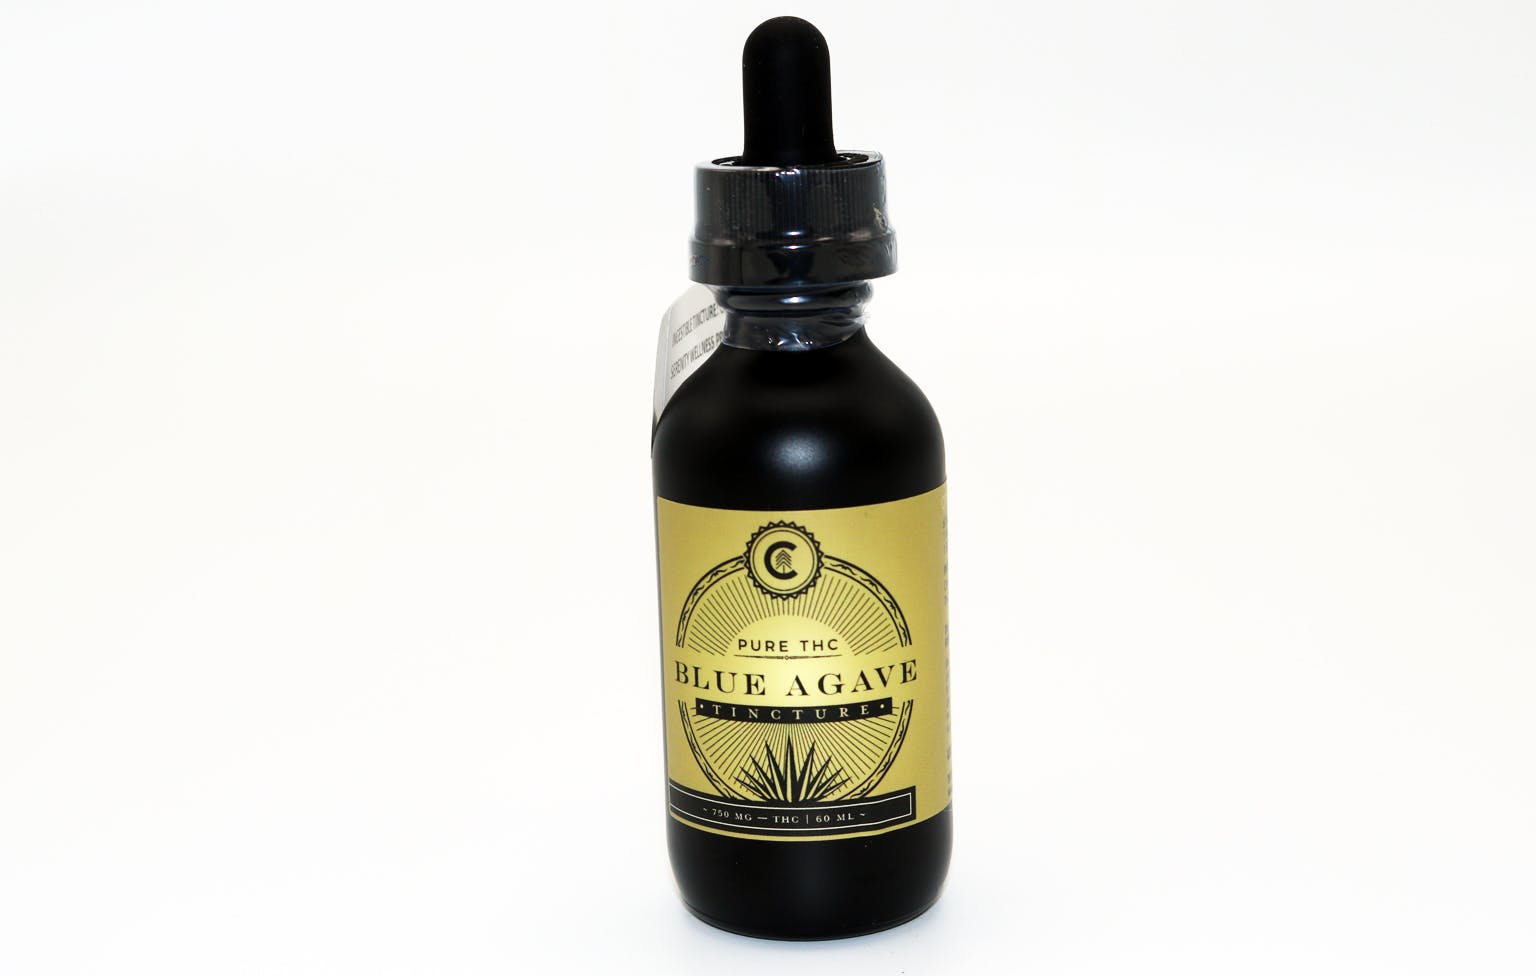 tincture-city-trees-pure-thc-blue-agave-tincture-750mgs-city-trees